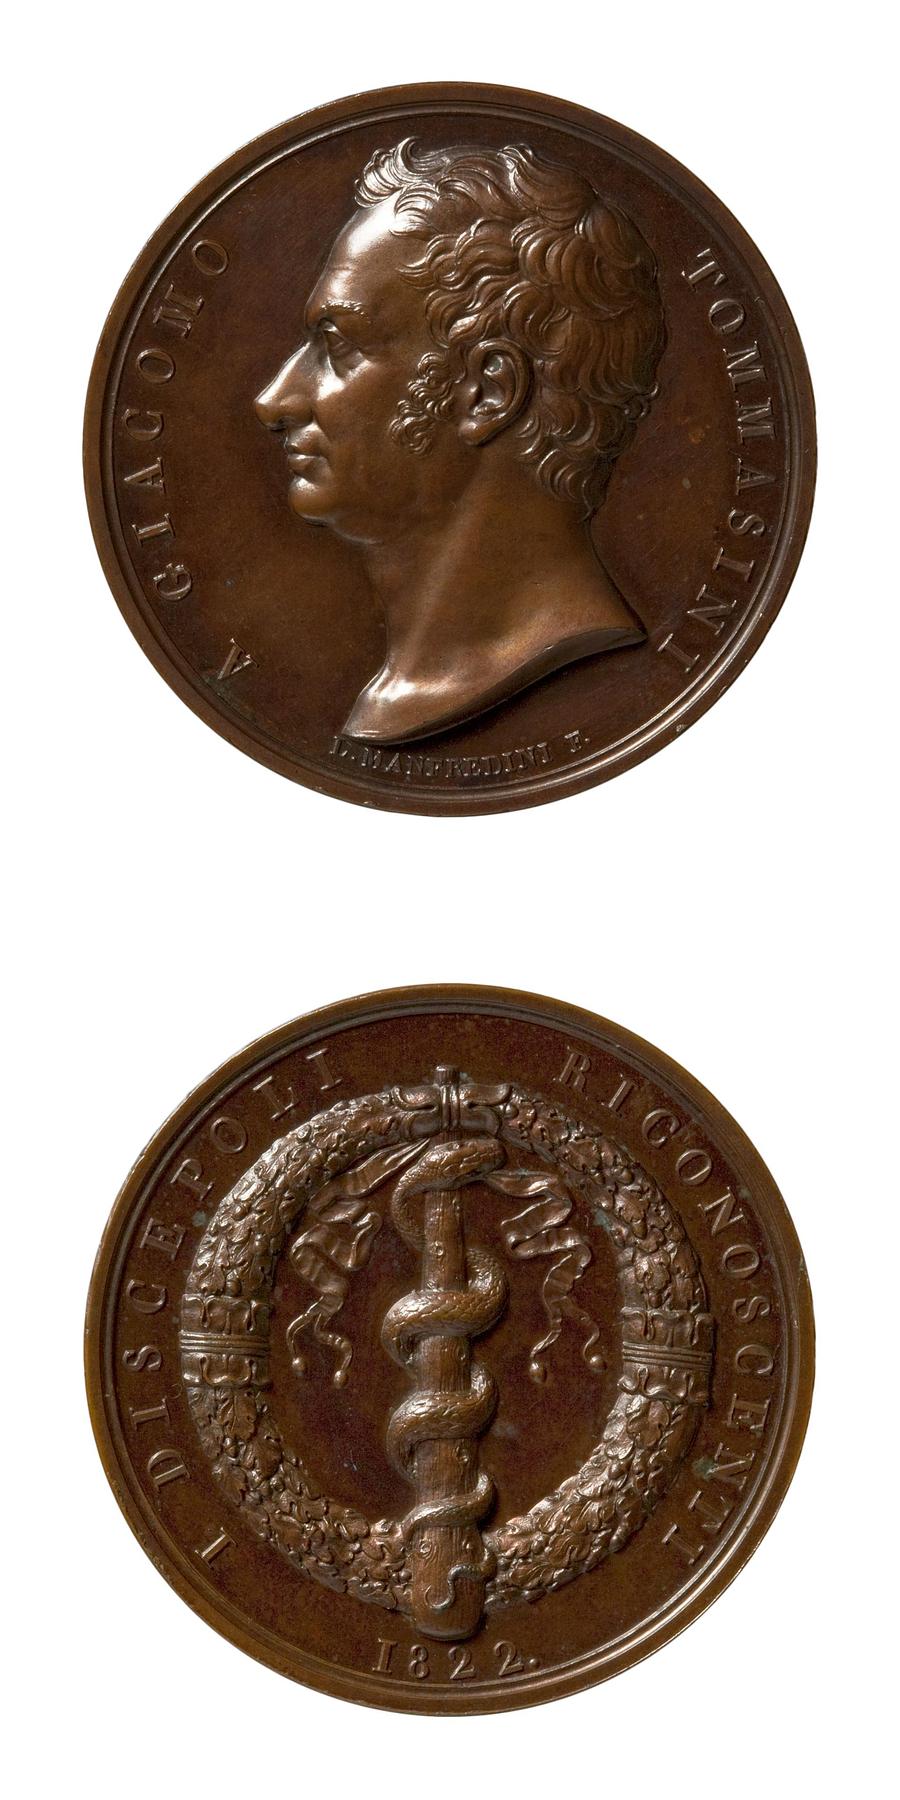 Medal obverse: Giacomo Tommasini. Medal reverse: Aesculapius' staff and an oak wreath, F100